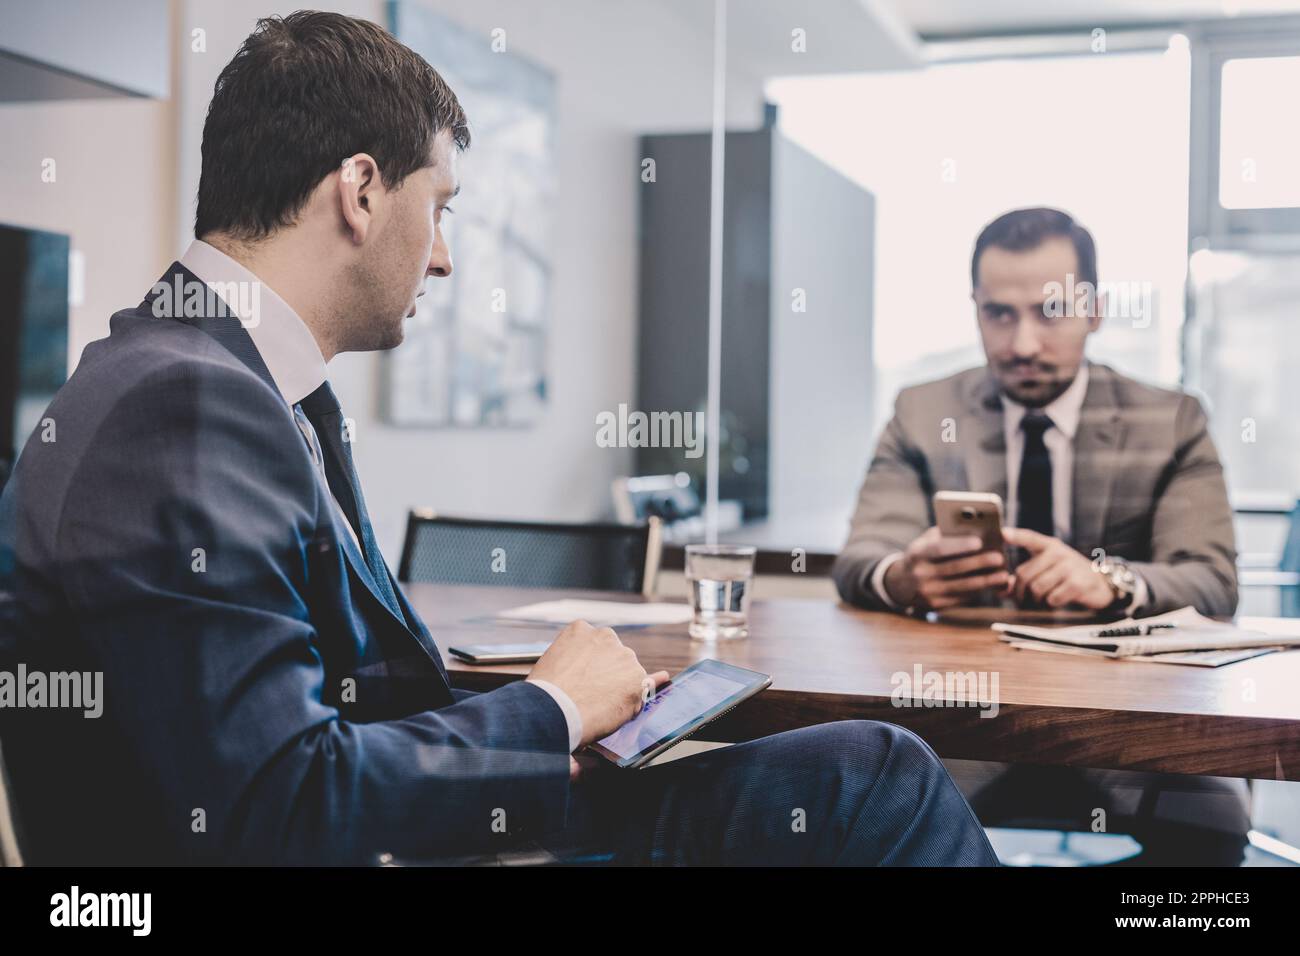 Two businessmen using smart phones and touchpad at meeting. Stock Photo